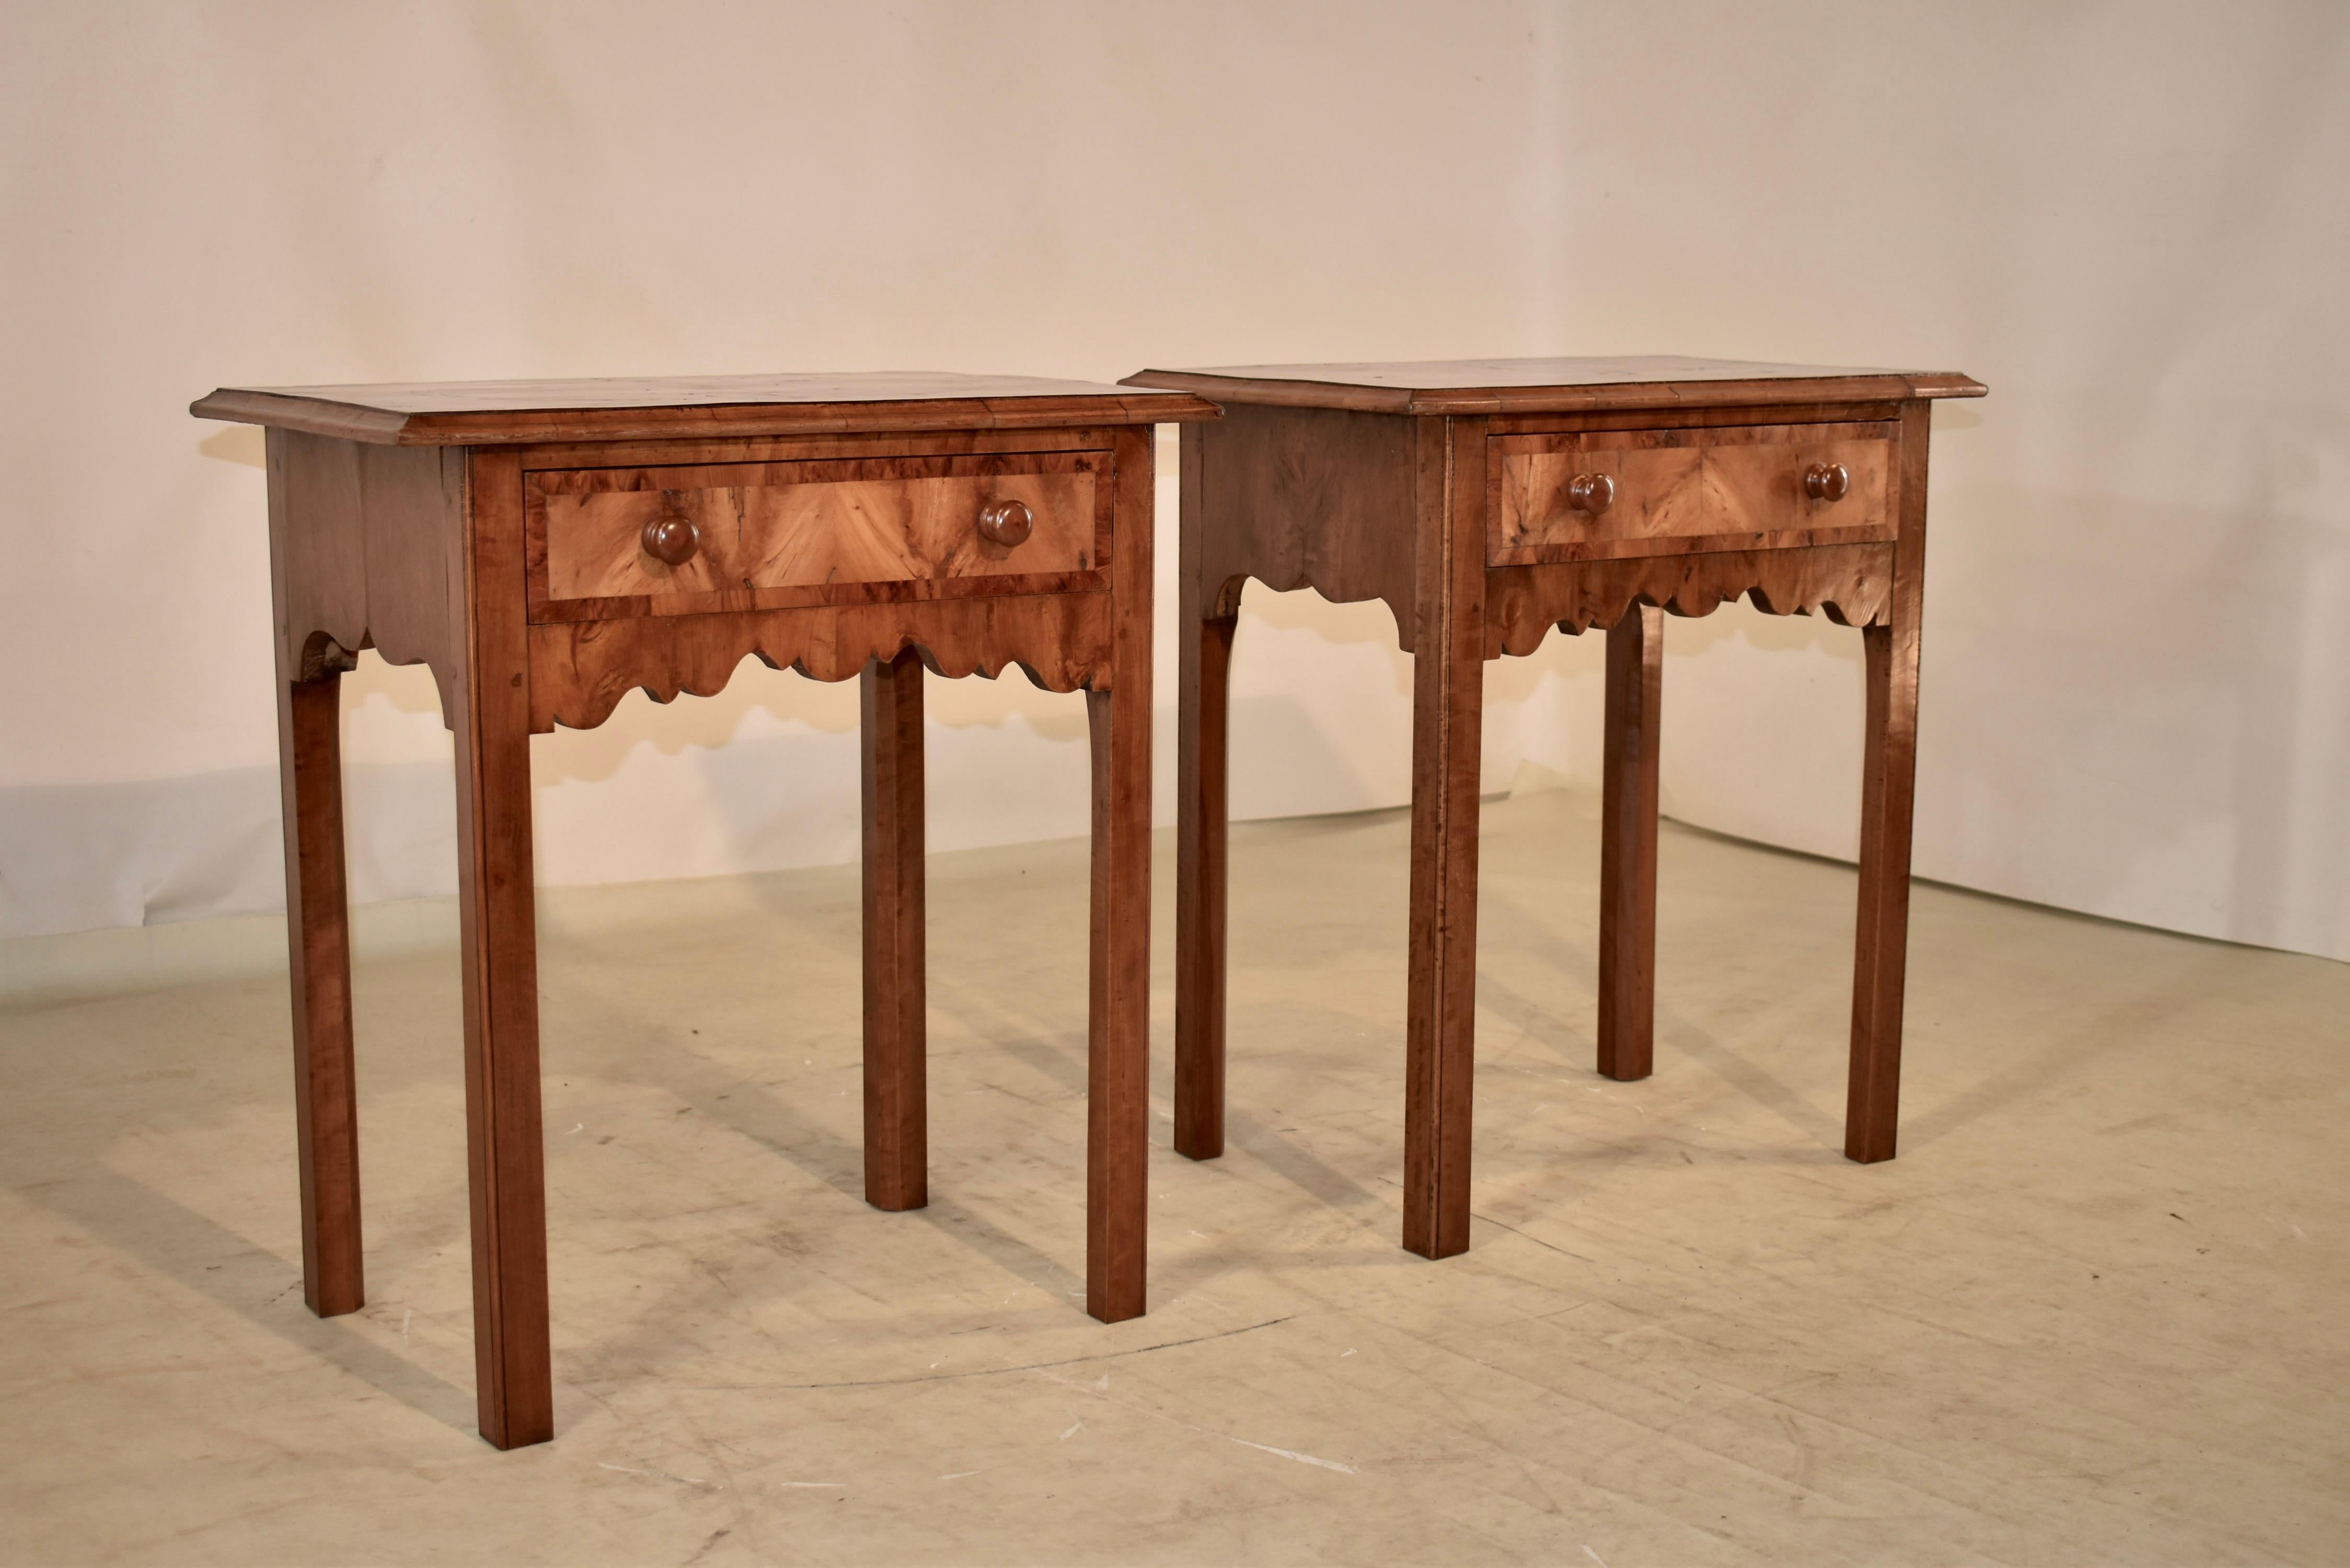 Pair of 19th century walnut side tables from France. The tops feature book matched walnut of wonderful quality and graining, and have an inner oval band, and and outer banding which really set off the design of the top of the tables. The tops have